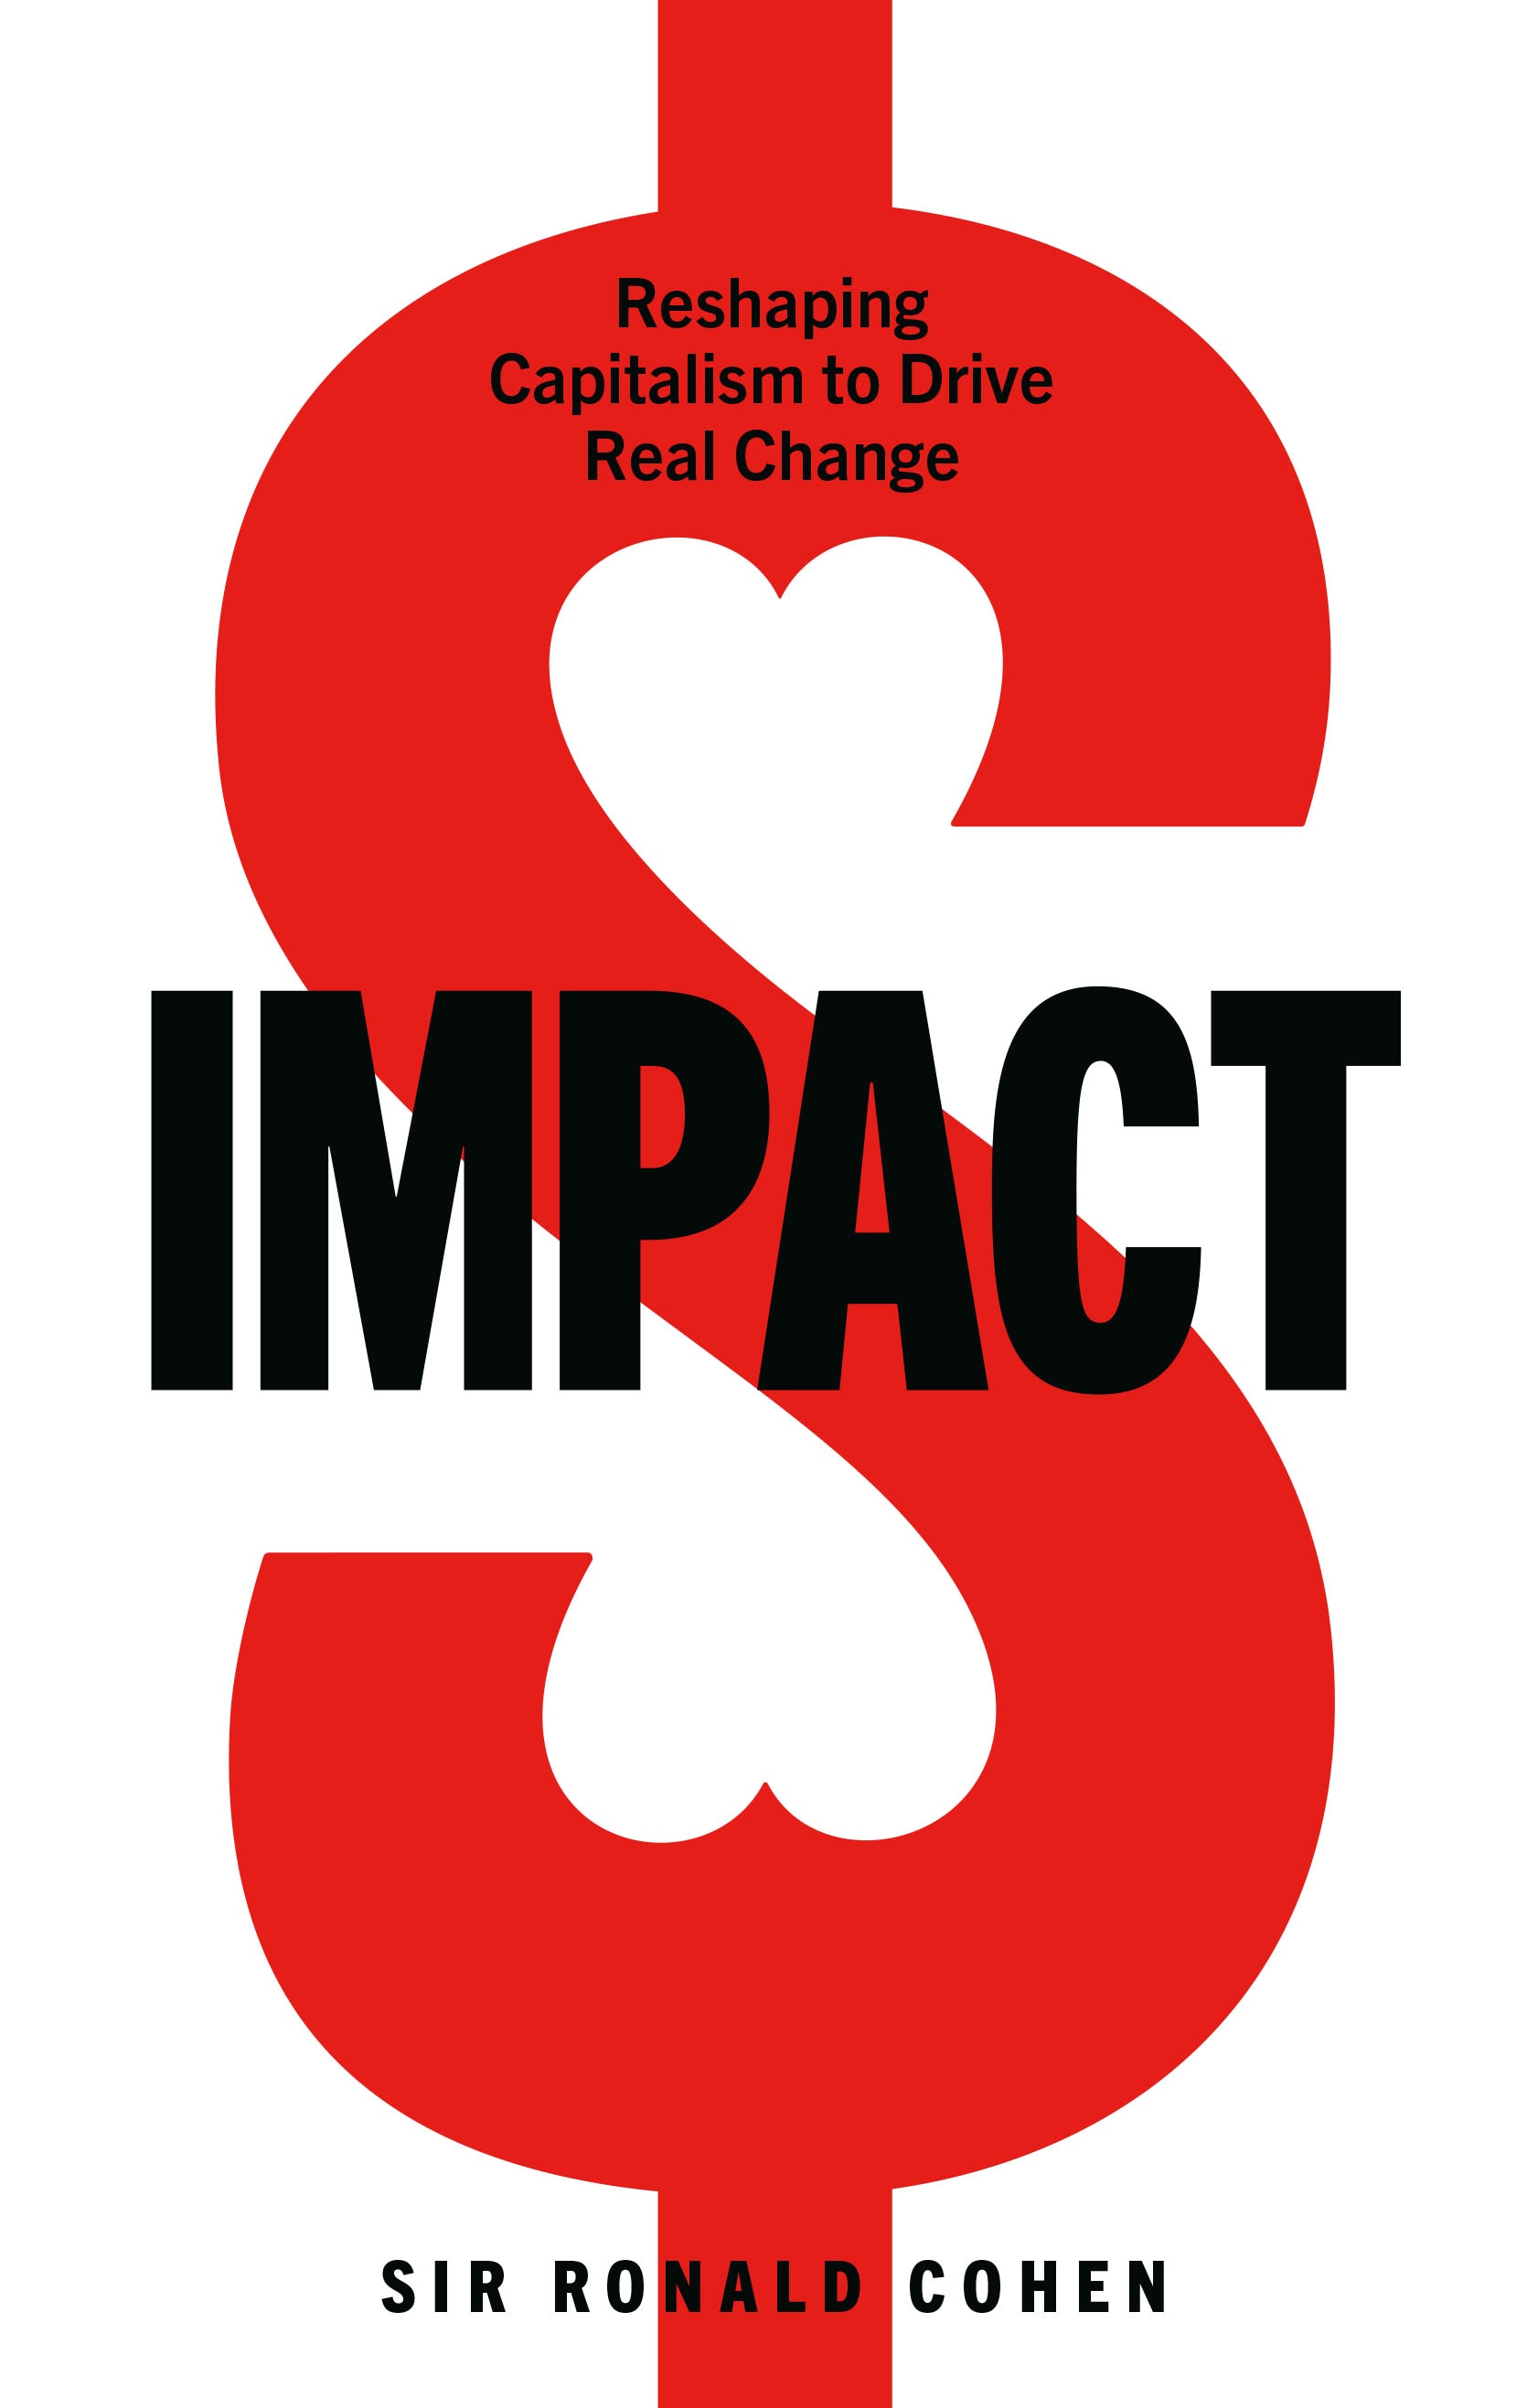 Book “Impact” by Ronald Cohen — July 2, 2020